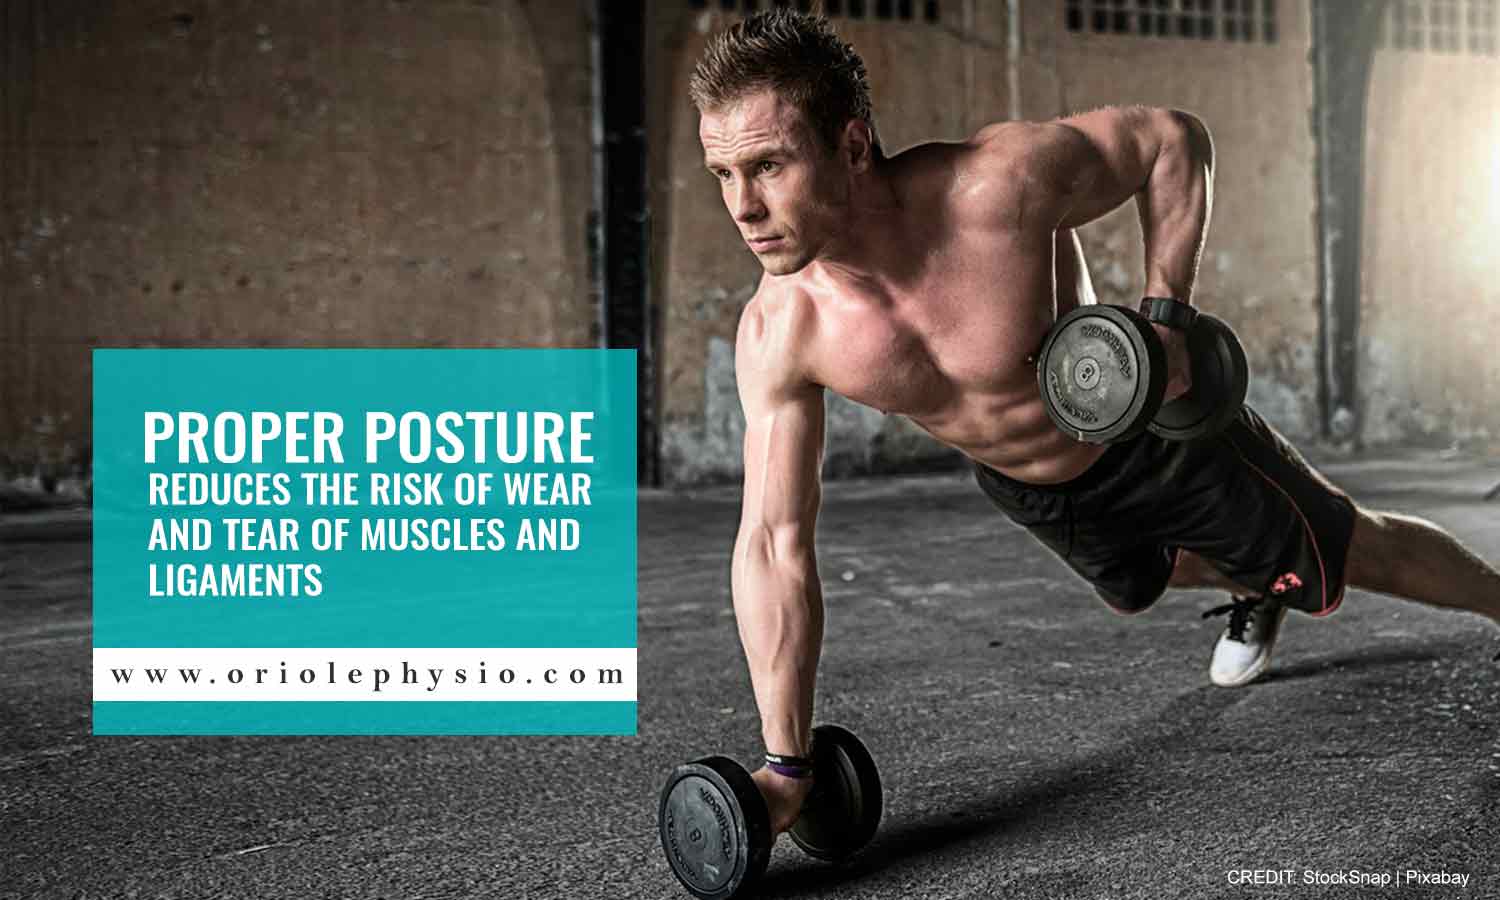 Proper posture reduces the risk of wear and tear of muscles and ligaments